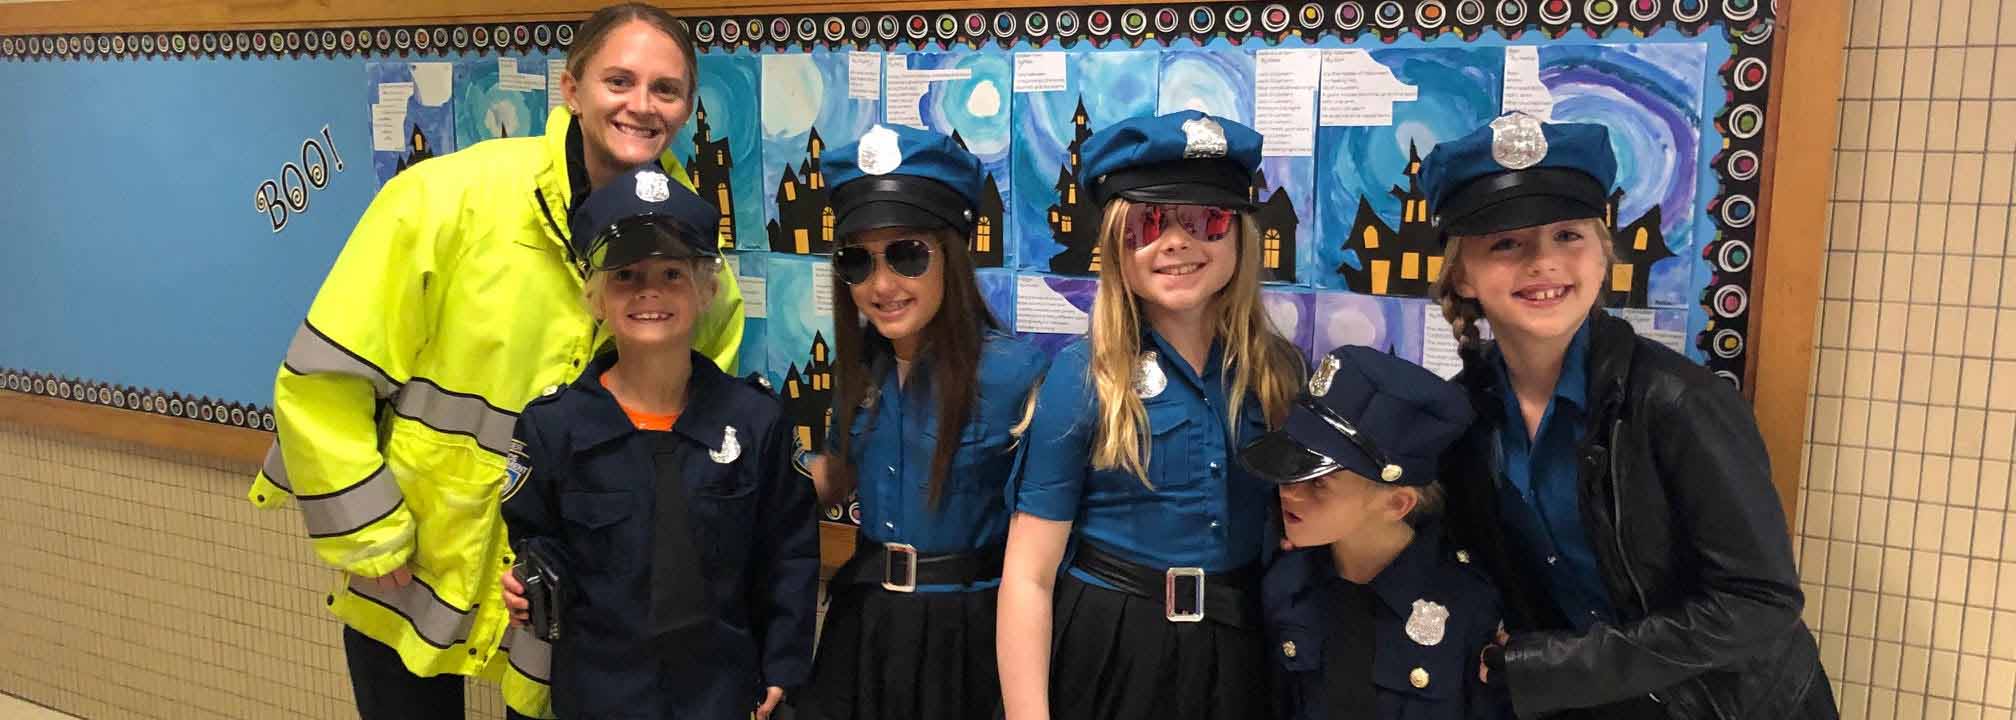 Student Dressed as Police Officers for Halloween